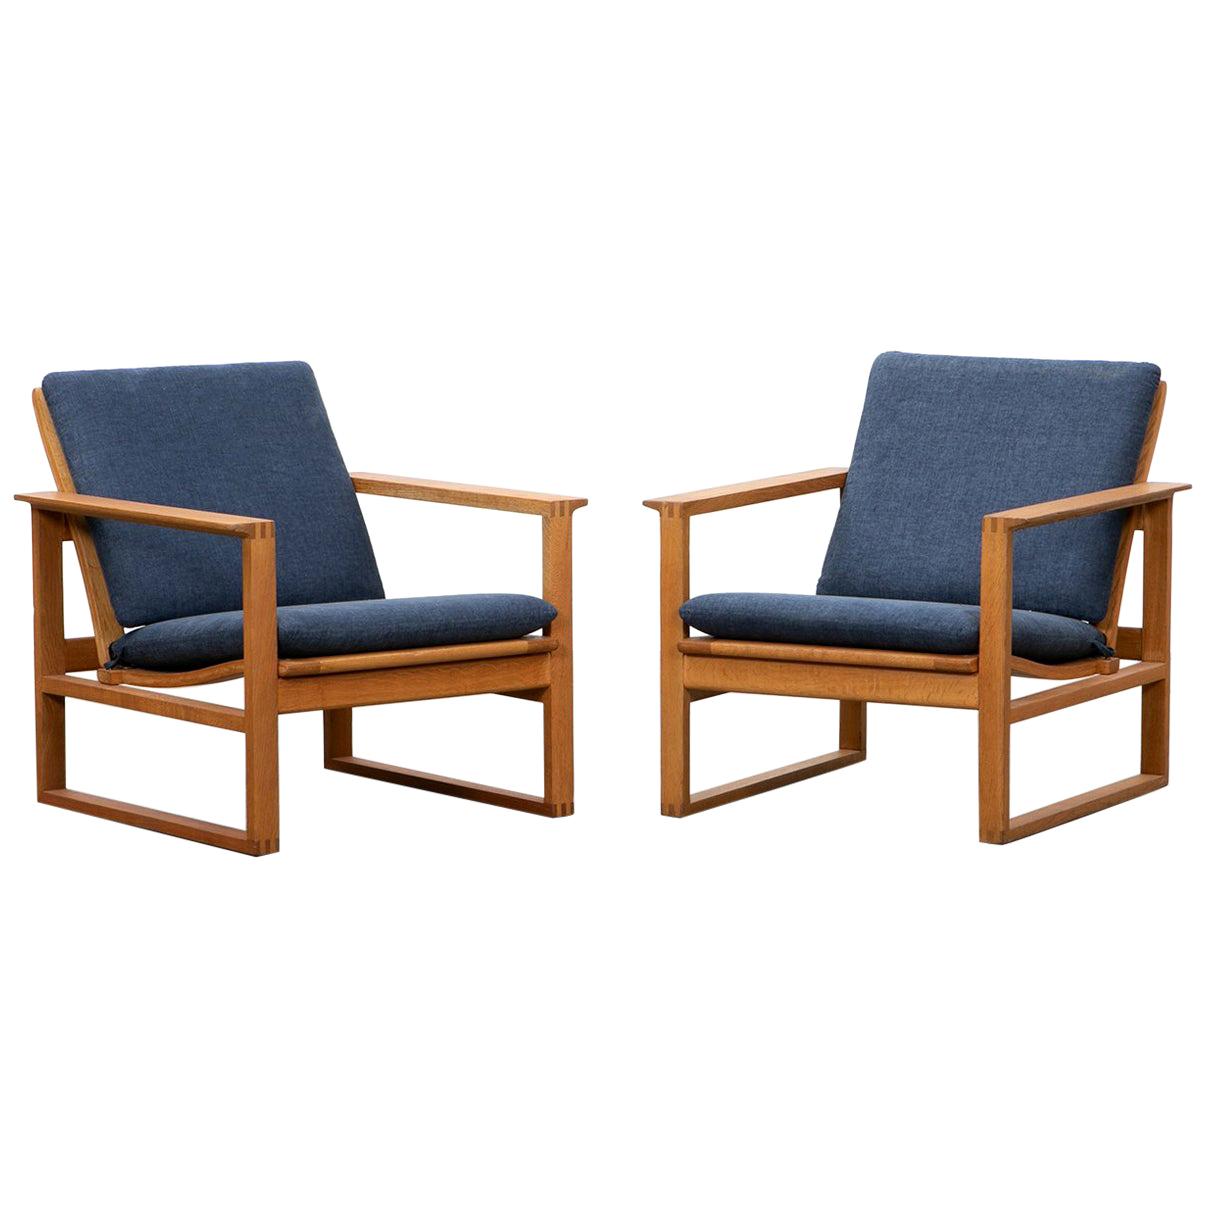 1950s Wooden Oak Pair of Børge Mogensen Lounge Chairs, New Upholstery